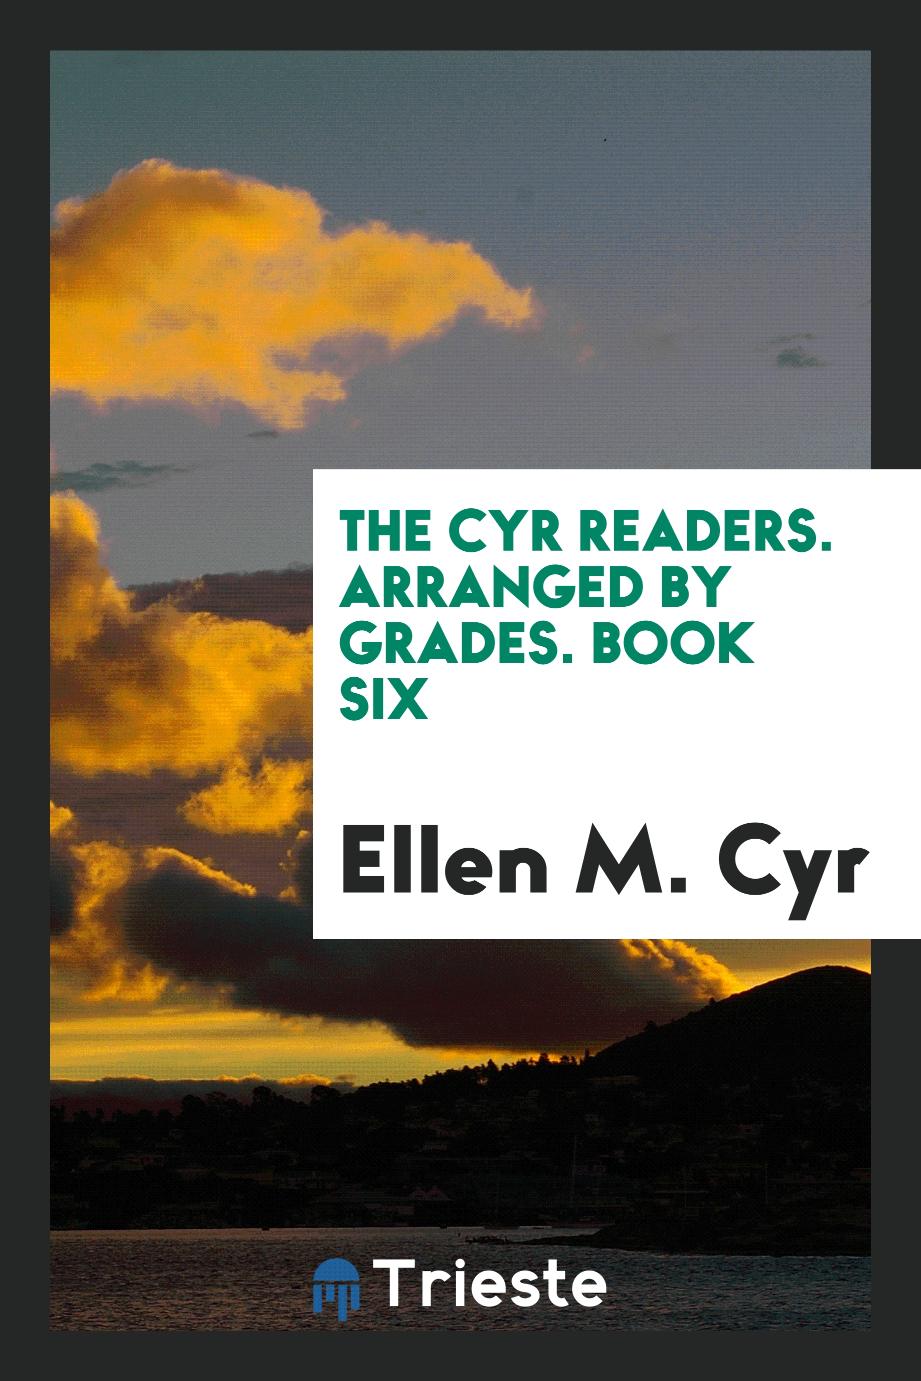 The Cyr Readers. Arranged by Grades. Book Six